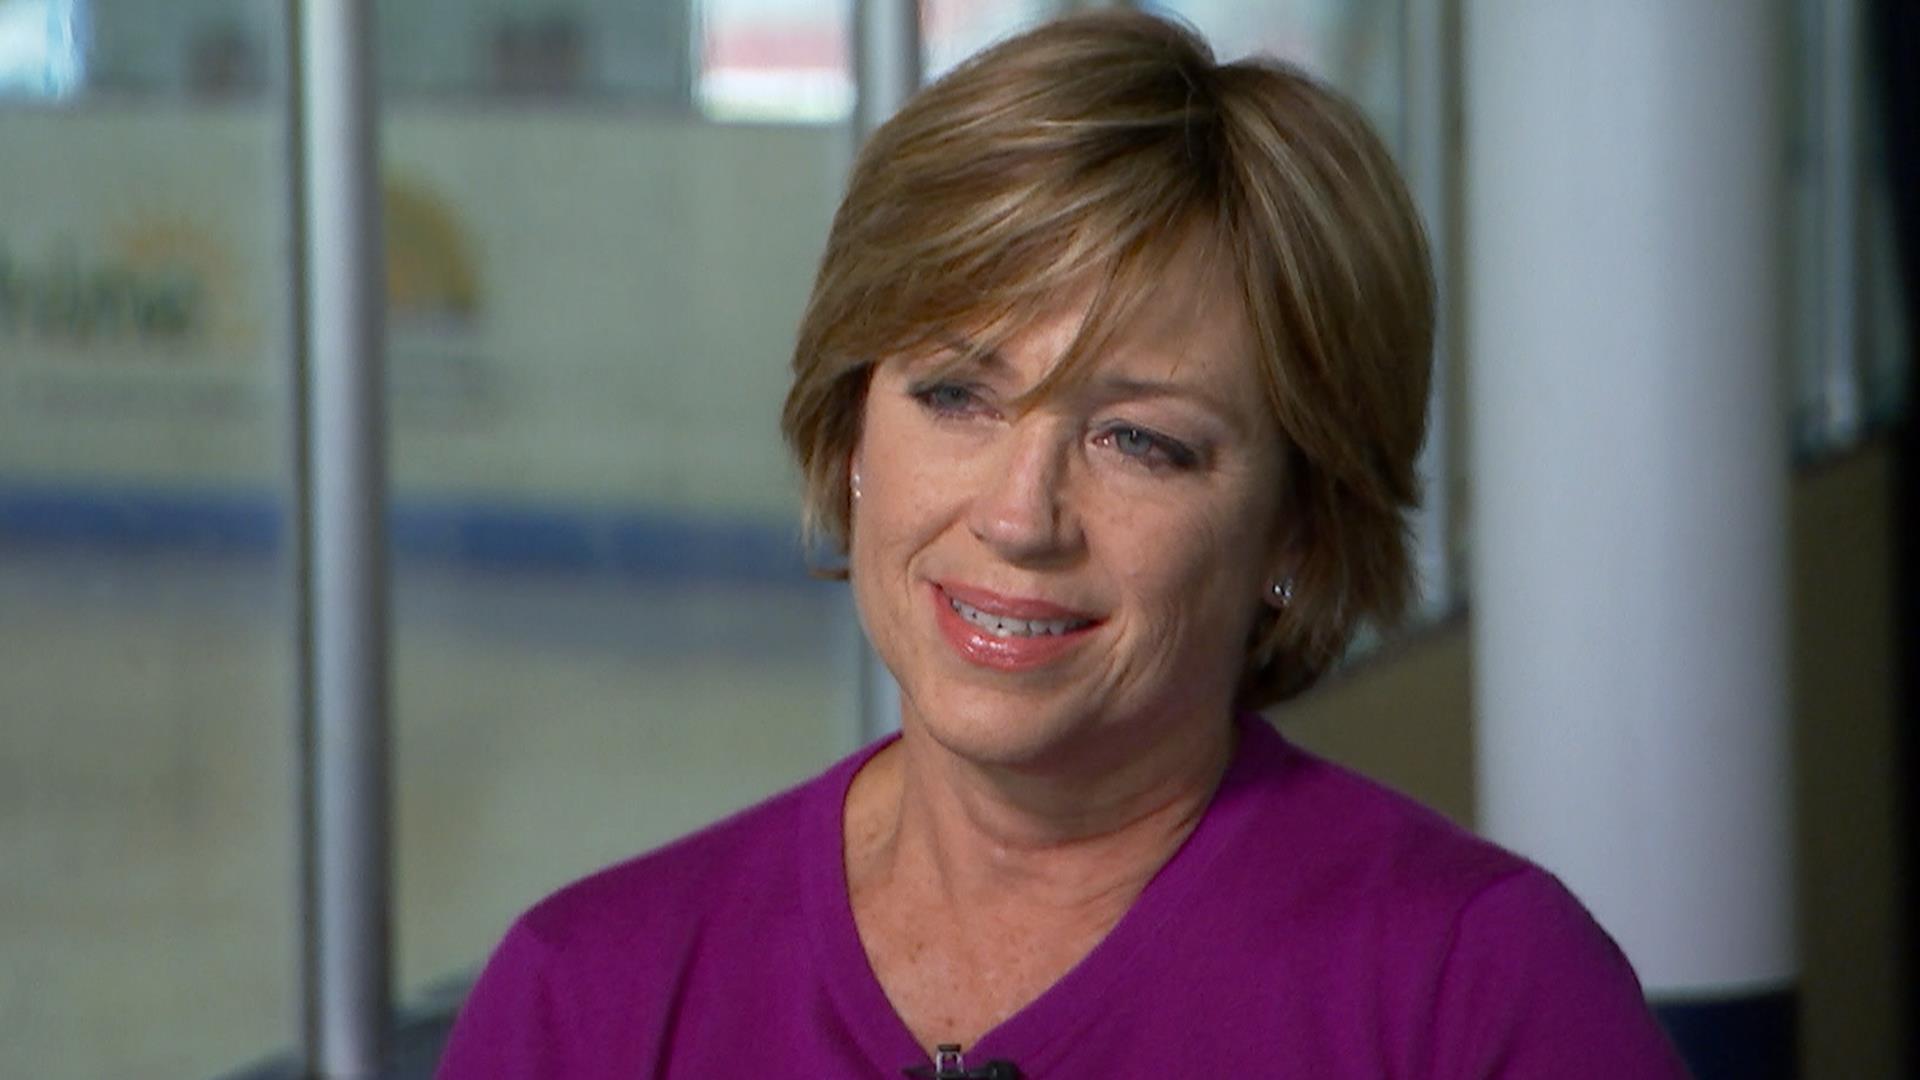 Dorothy Hamill looks back on Olympic gold, her famous haircut and fight with cancer